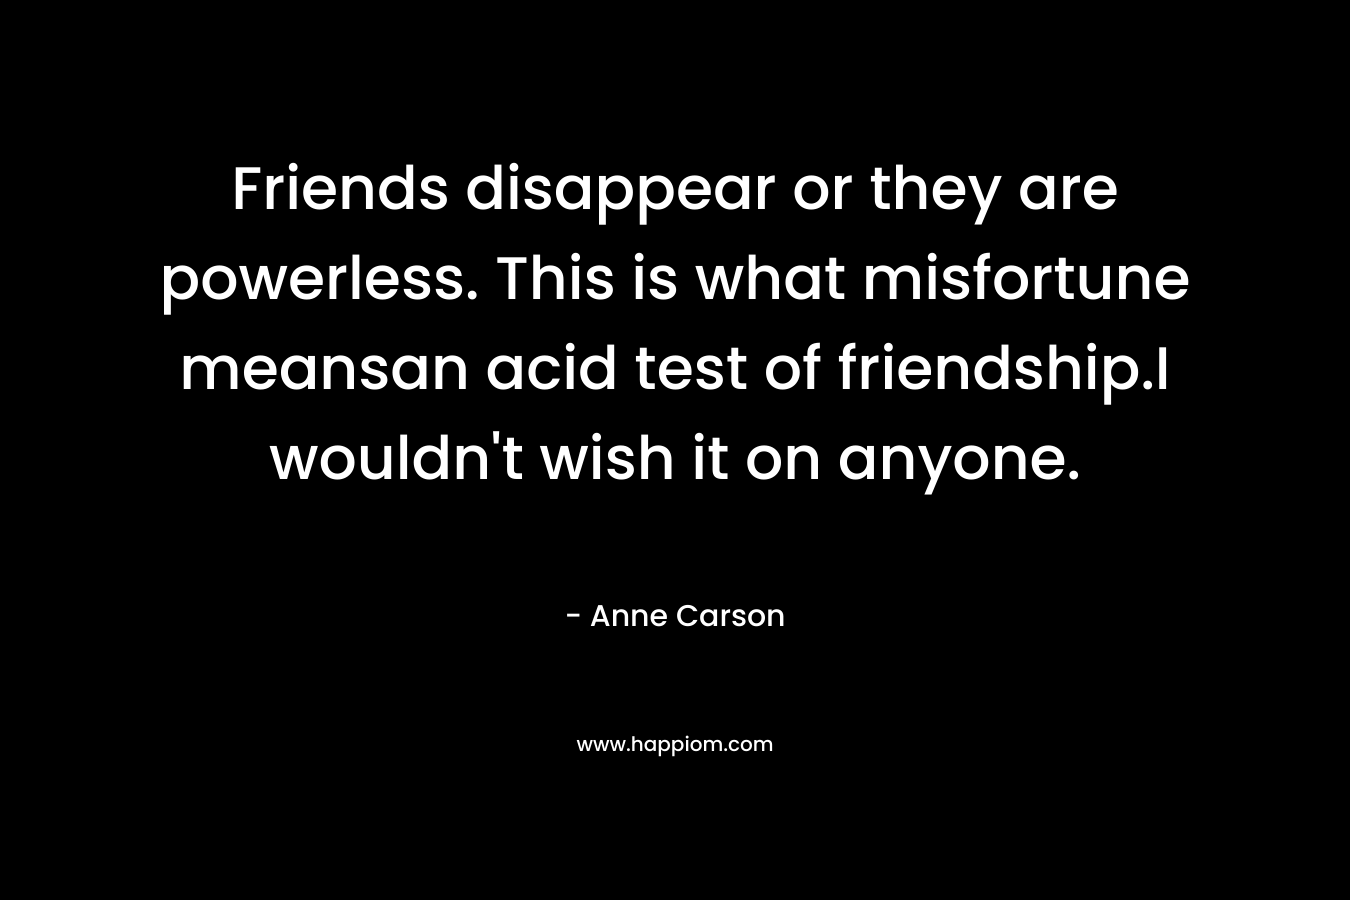 Friends disappear or they are powerless. This is what misfortune meansan acid test of friendship.I wouldn't wish it on anyone.